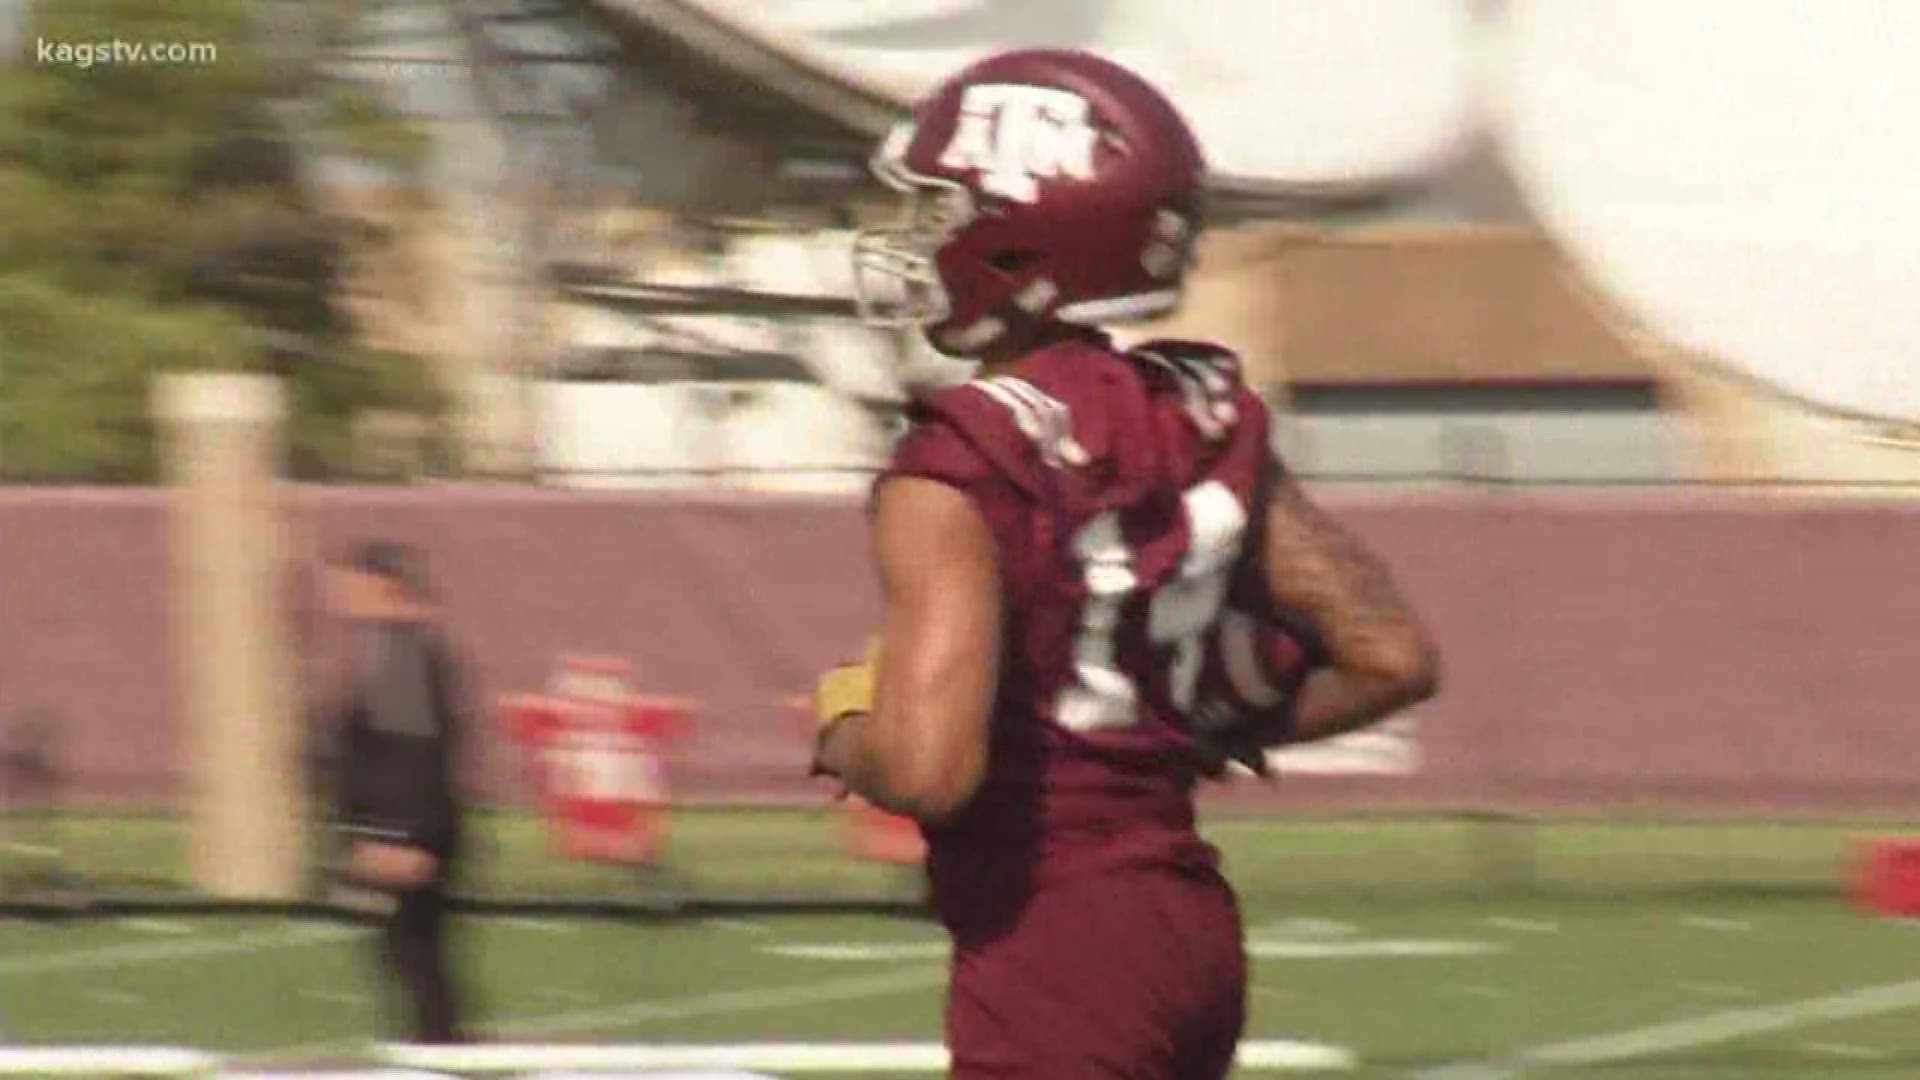 Here's a look at the wide receiver and defensive back position for the Aggie football team as it held spring practice number three on Saturday.